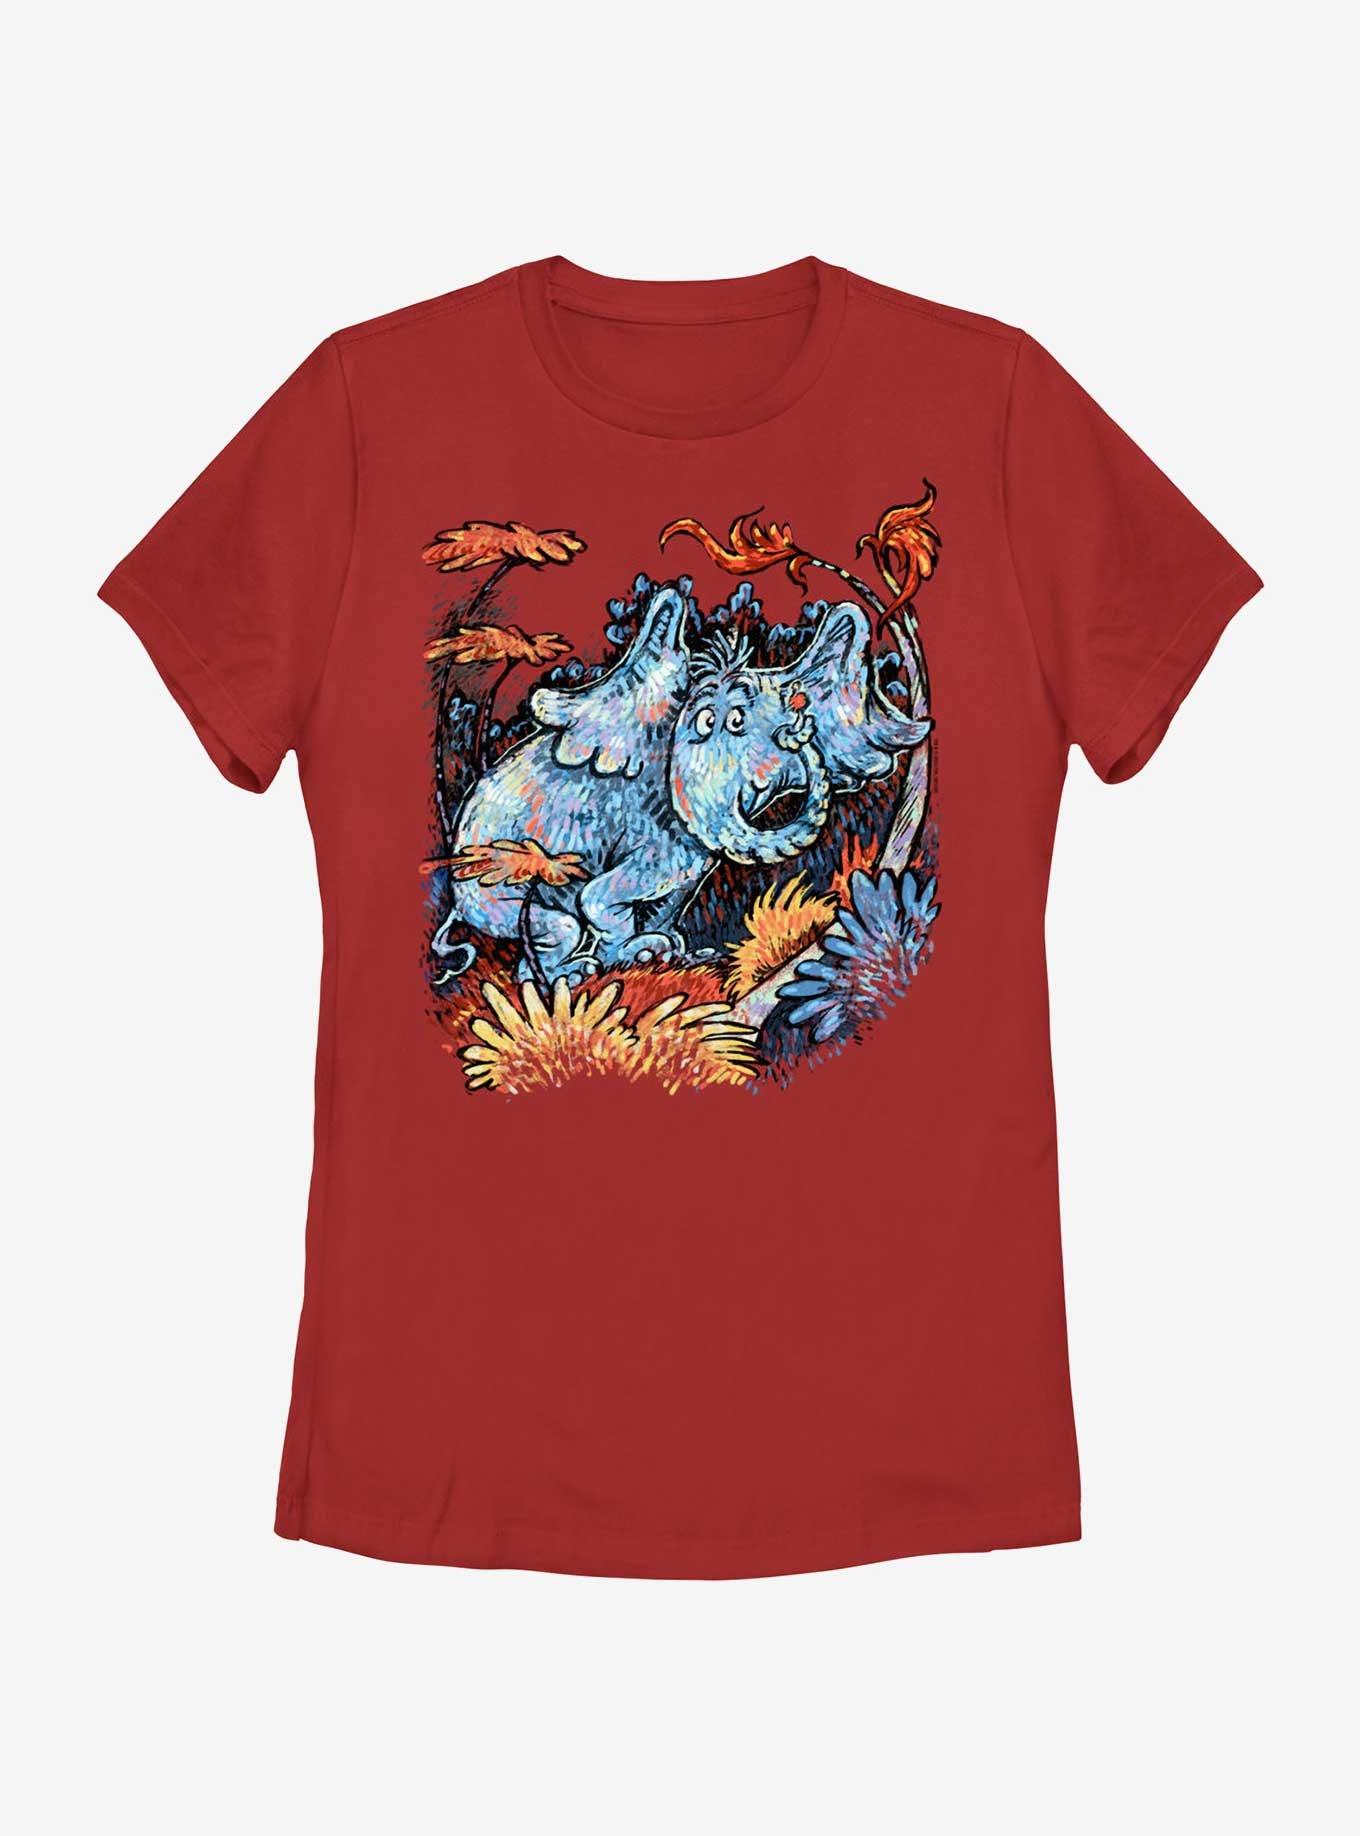 Dr. Seuss Horton Hears A Who Painting Womens T-Shirt, RED, hi-res